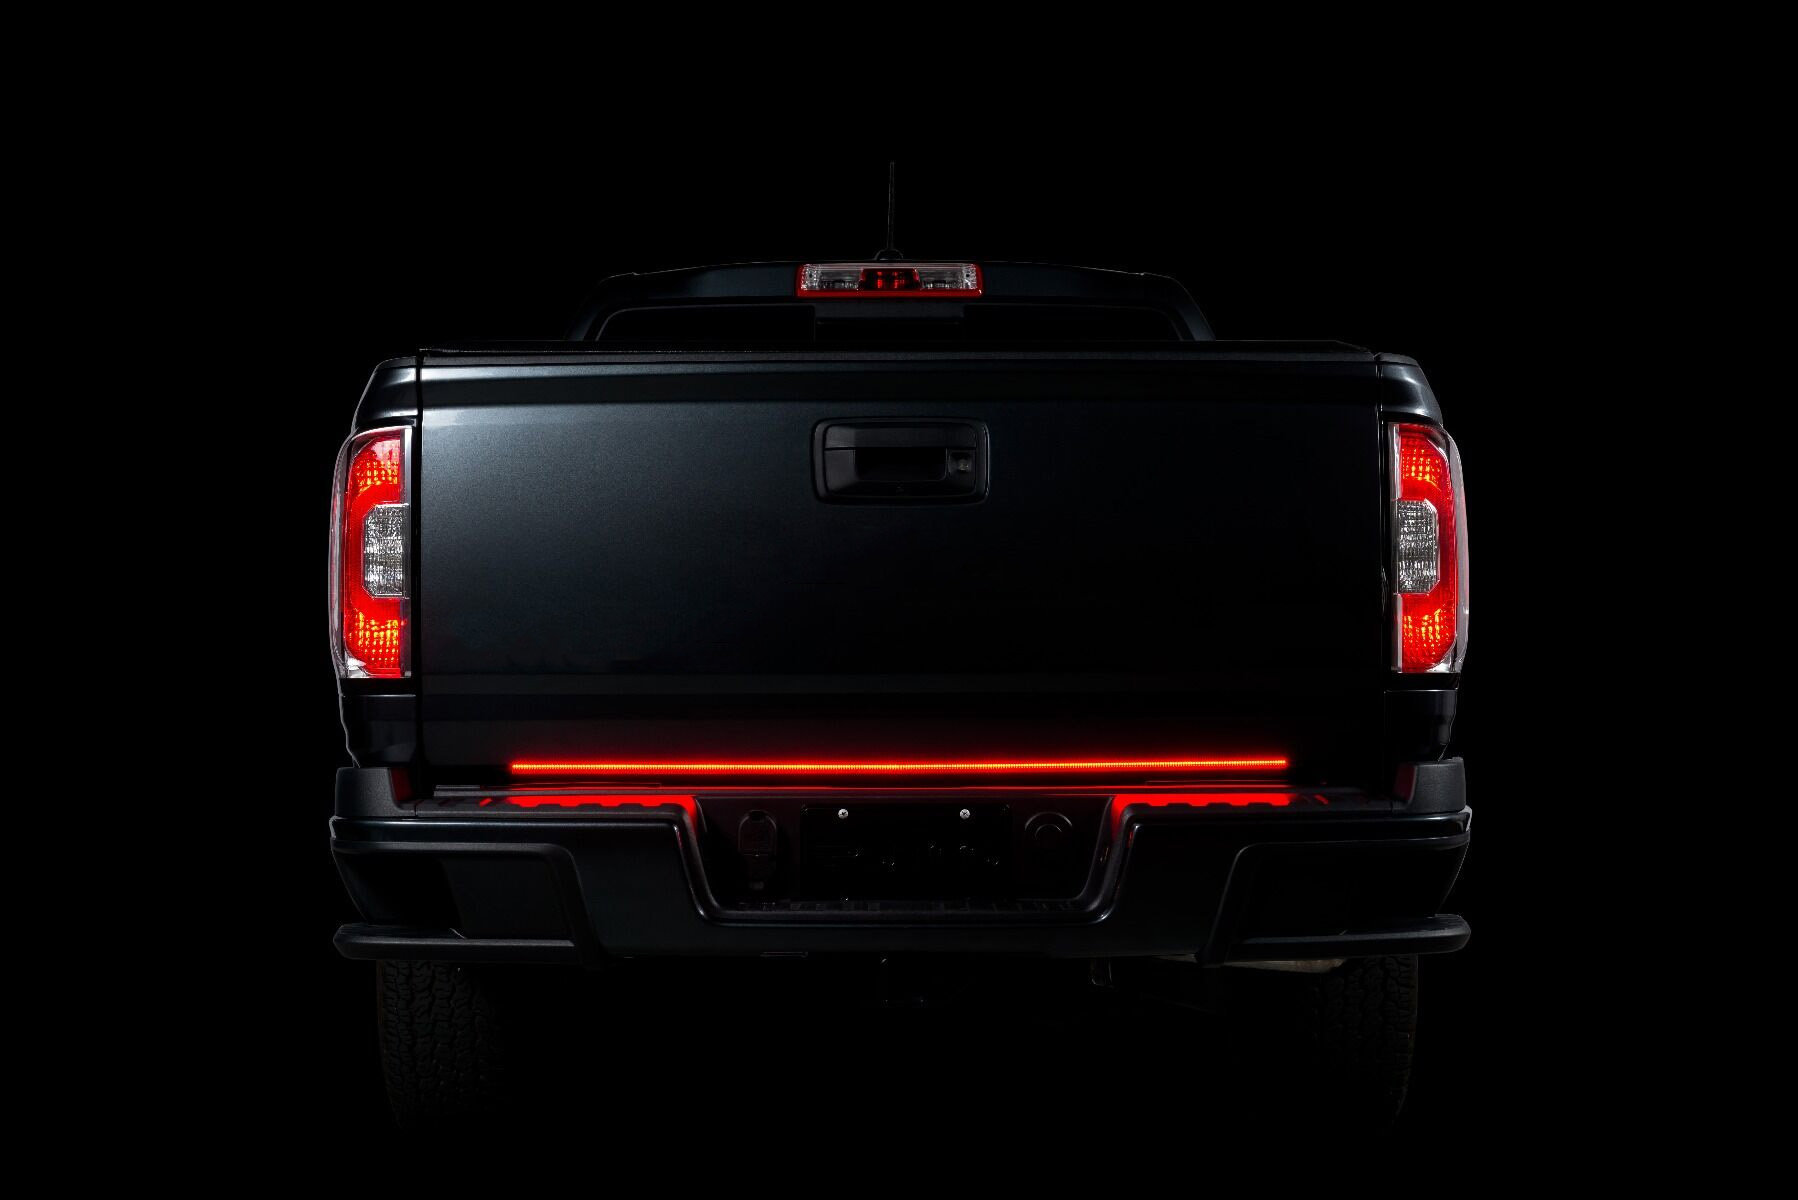 https://www.quadratec.com/sites/default/files/styles/product_zoomed/public/product_images/putco-97009-48-led-blade-48-inch-tailgate-light-bar-jeep-gladiator-jt-installed-backup-red.jpg